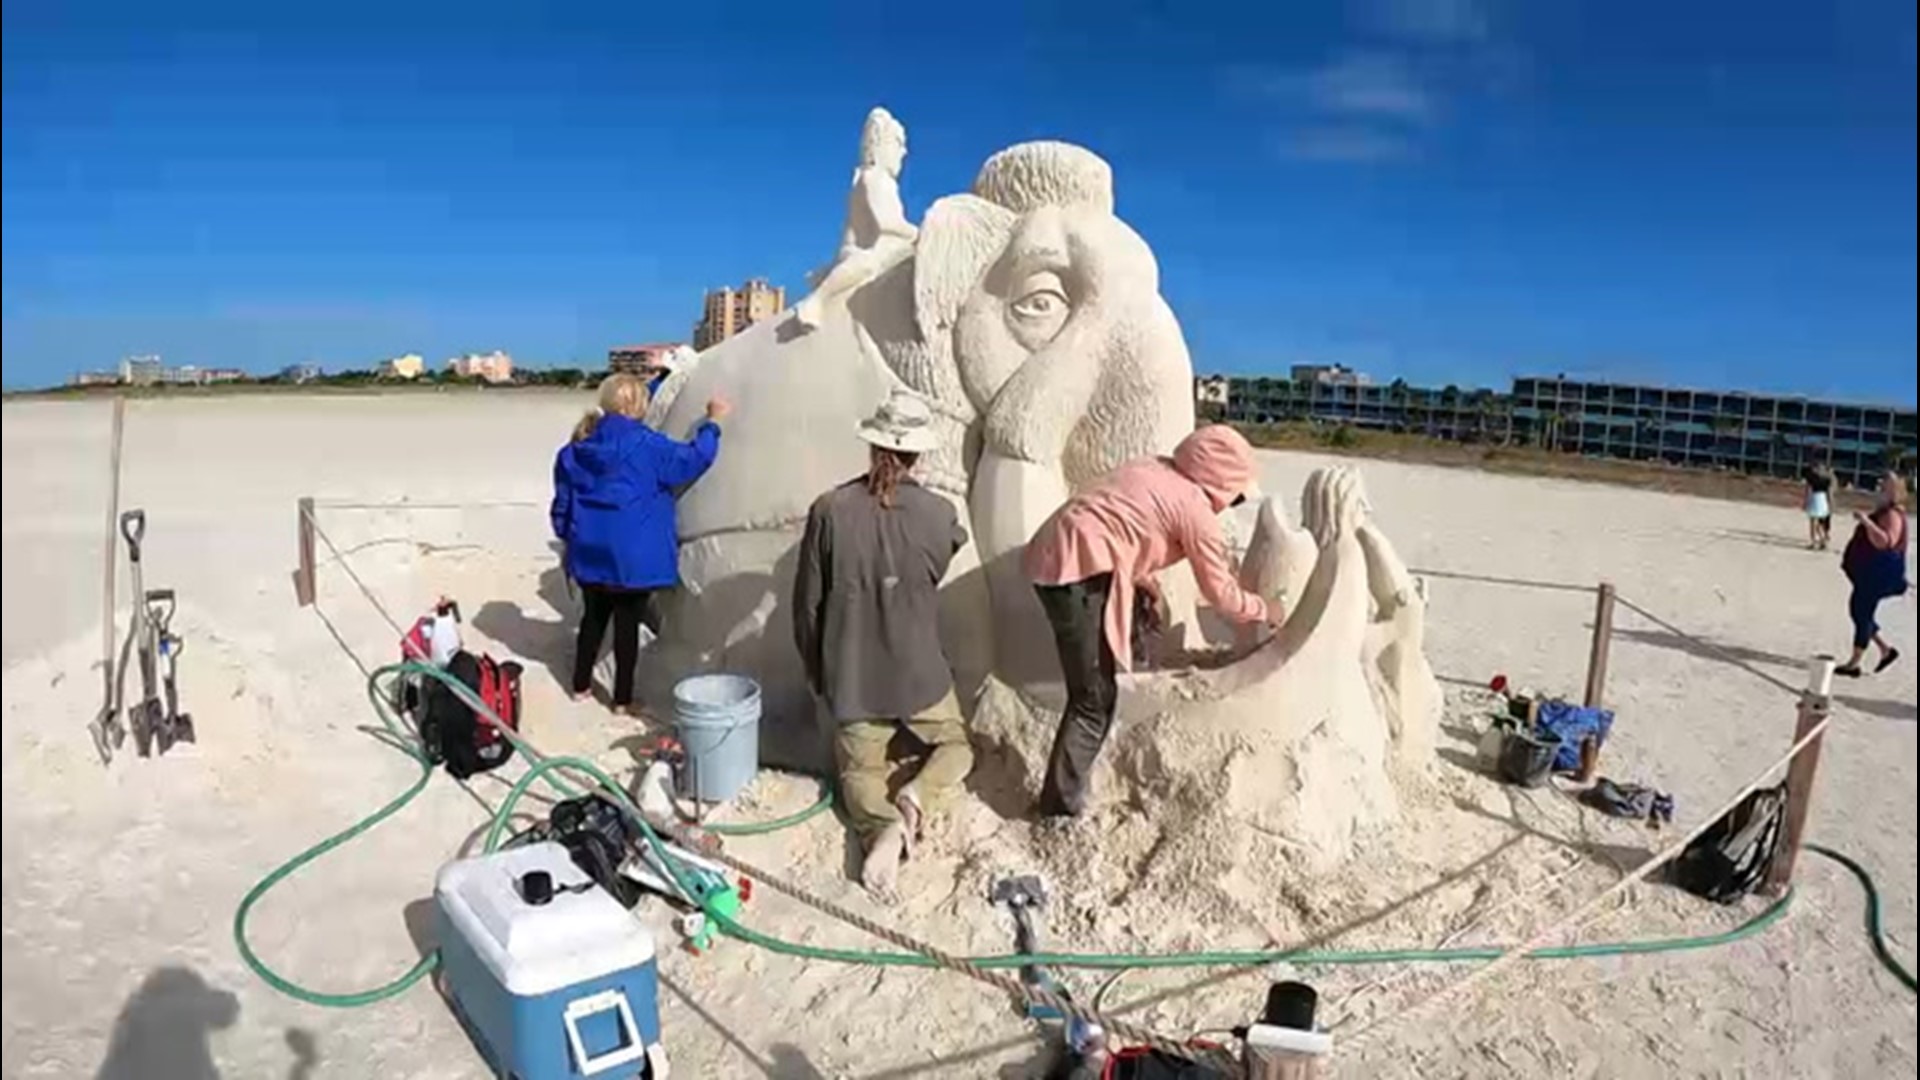 Storm surge from Eta wiped out a weeks' worth of work from professional sand sculptors on Treasure Island, Florida, who had to rush to rebuild in time for this weekend's 'Sanding Ovation' showcase.